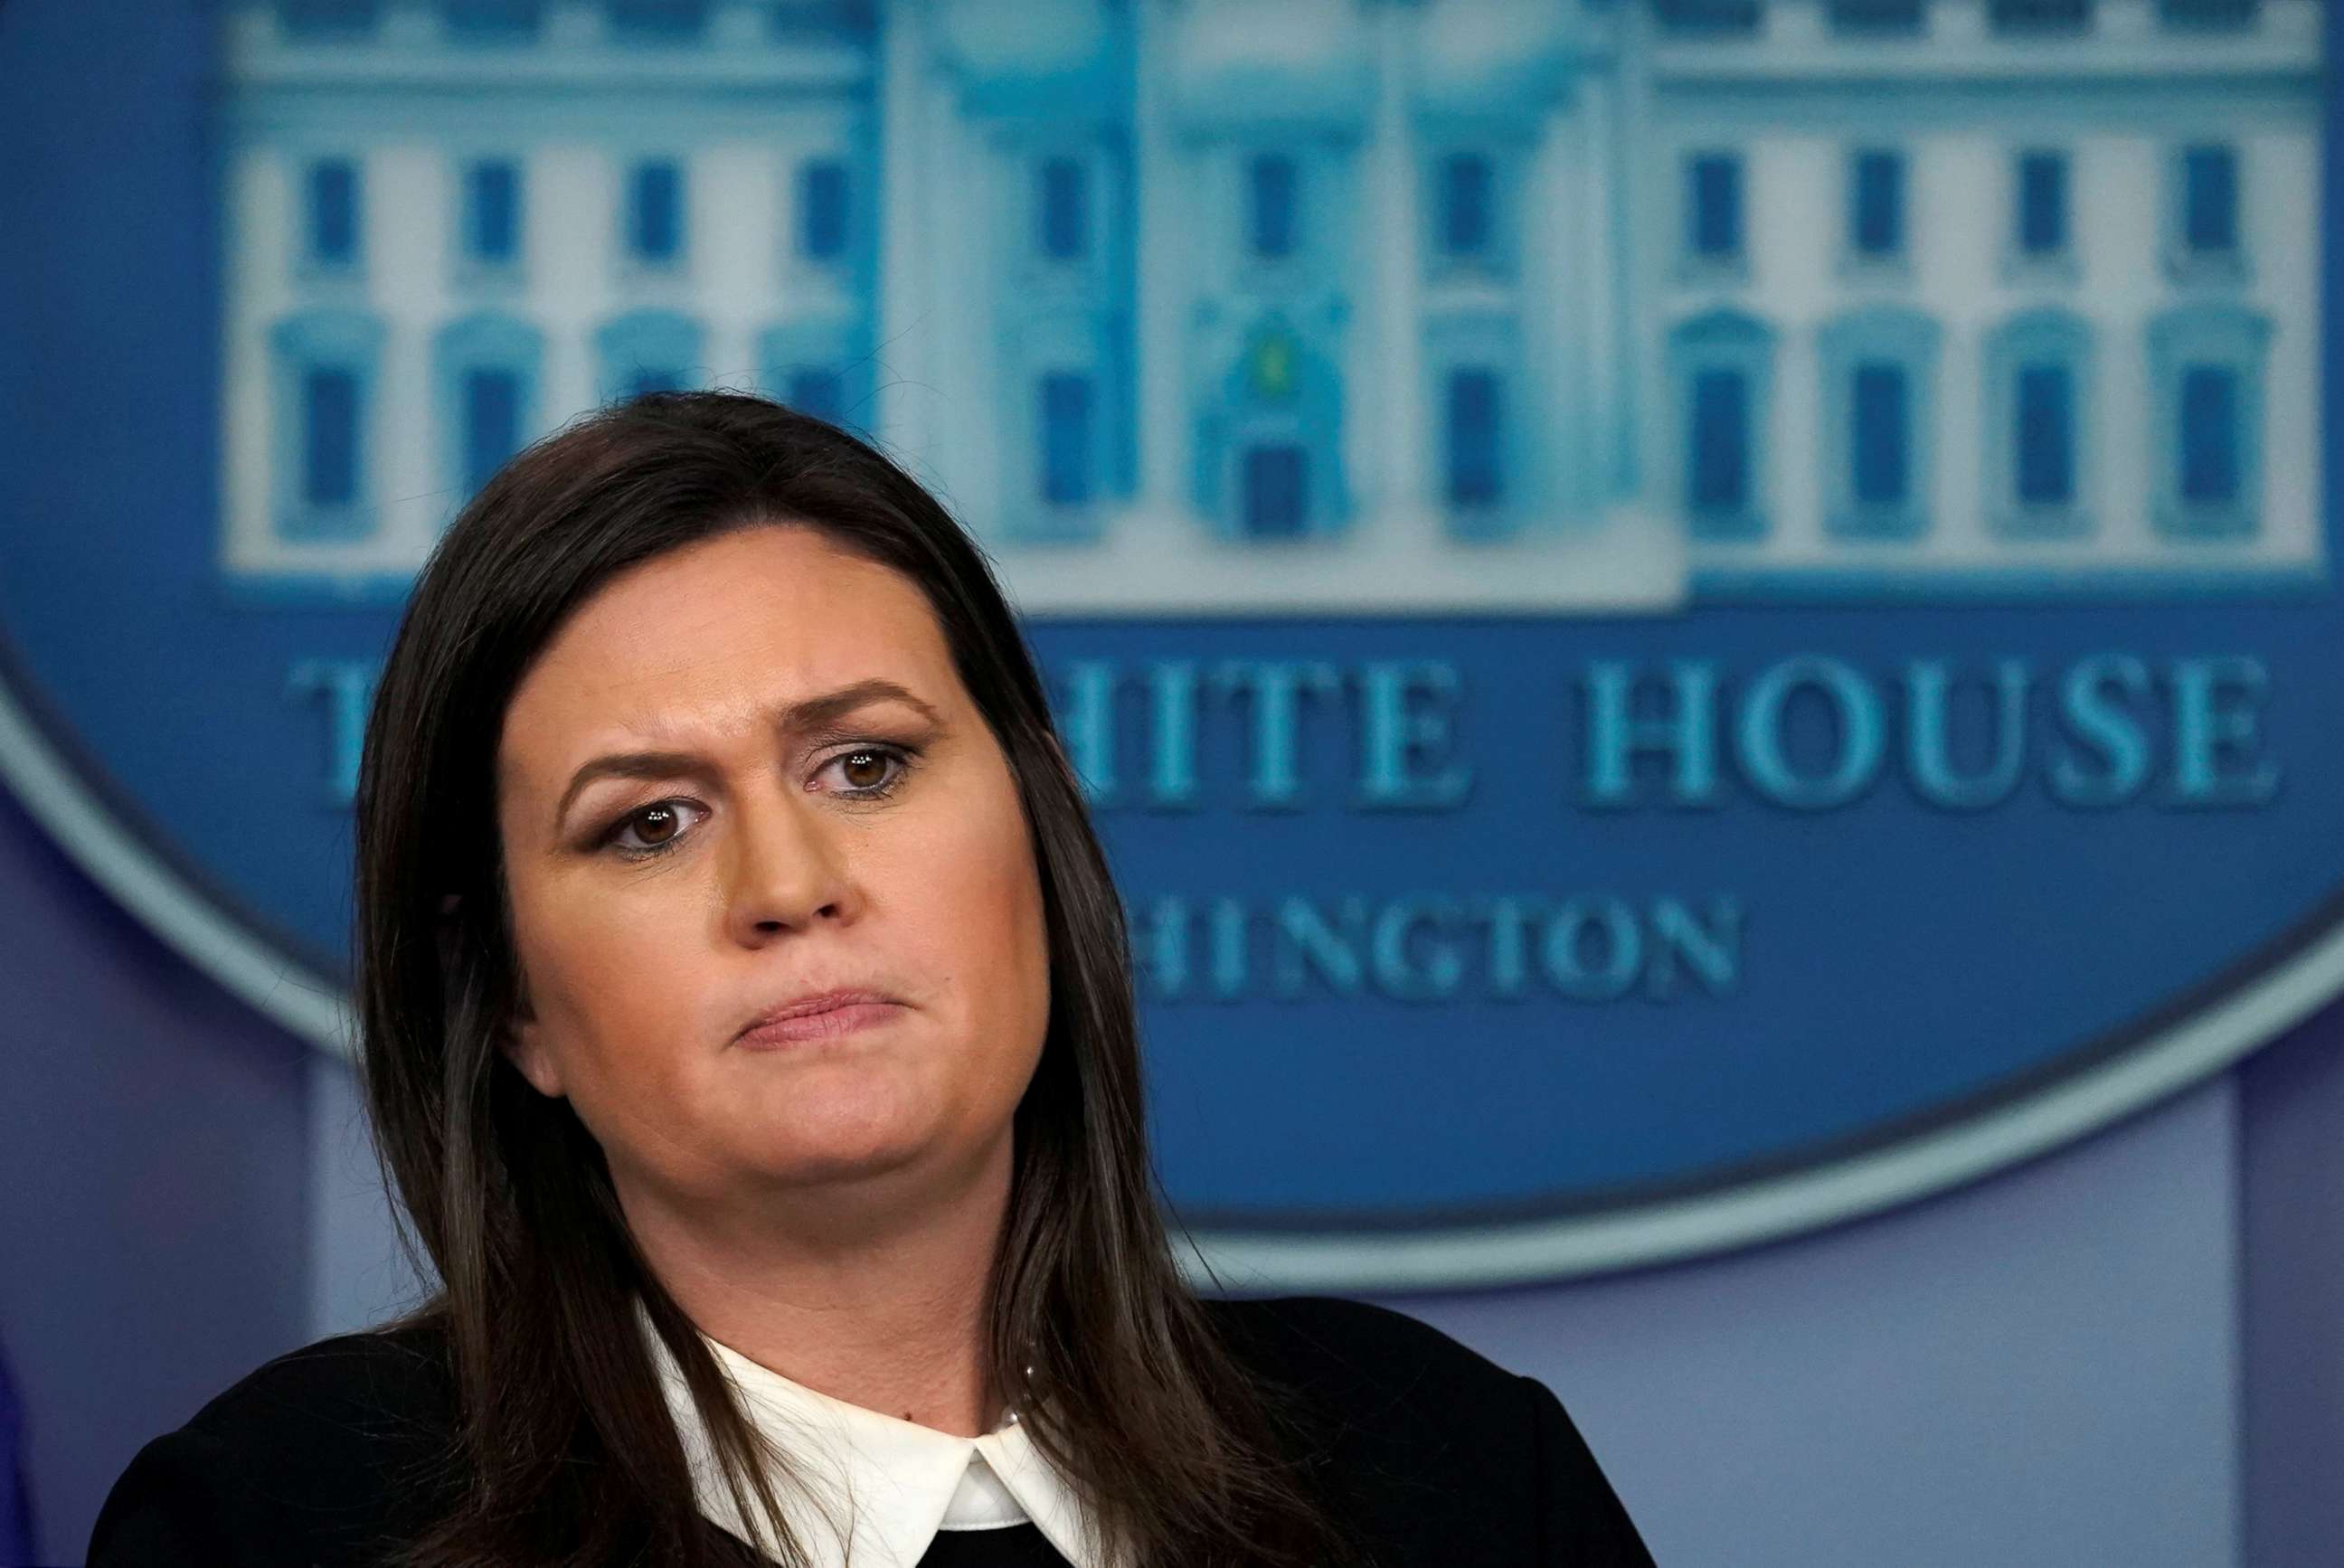 PHOTO: White House spokeswoman Sarah Sanders pauses during a press briefing at the White House in Washington, Dec. 18, 2018.